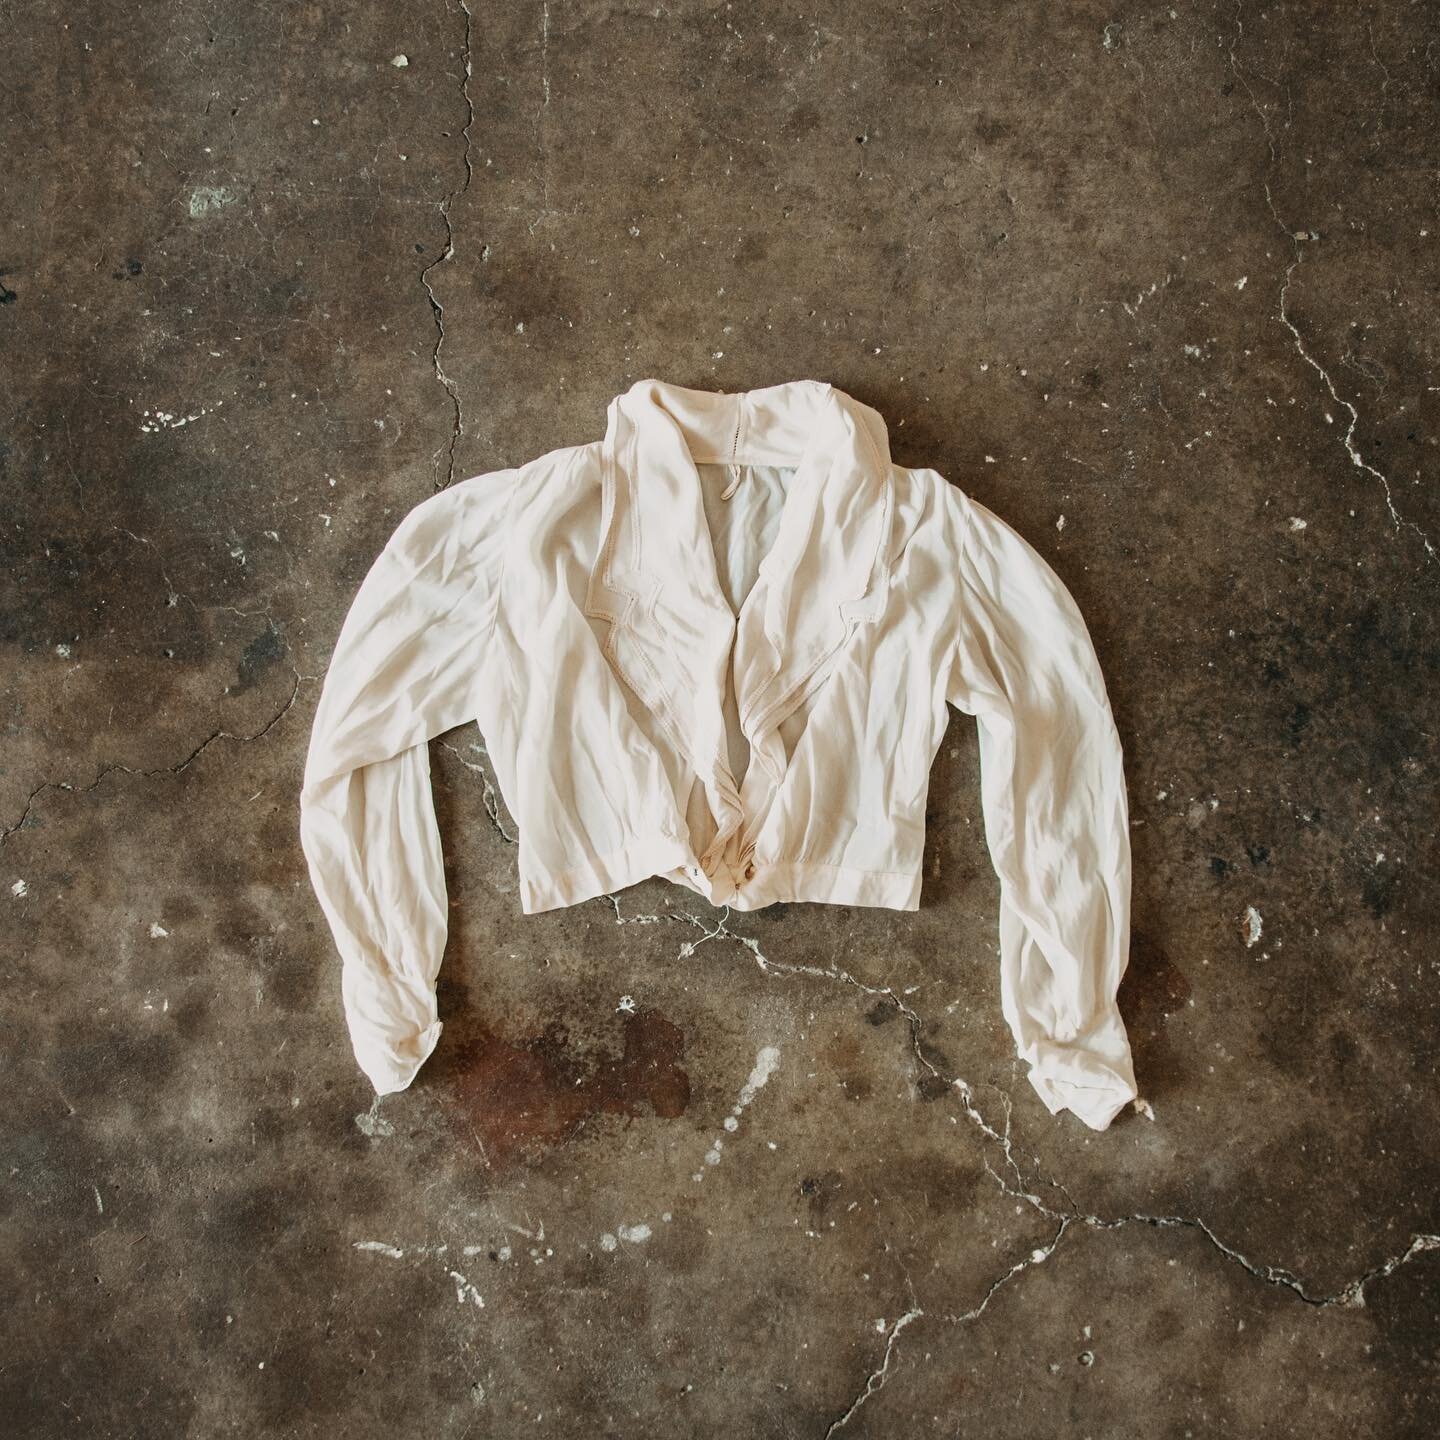 Vintage White Blouse

Very comfortable vintage blouse in excellent condition. There are no stains or holes. The material is silk-like, slightly see-through and an off-white color. The front closes with small hook and eye closures. Tag size 48.

Shoul